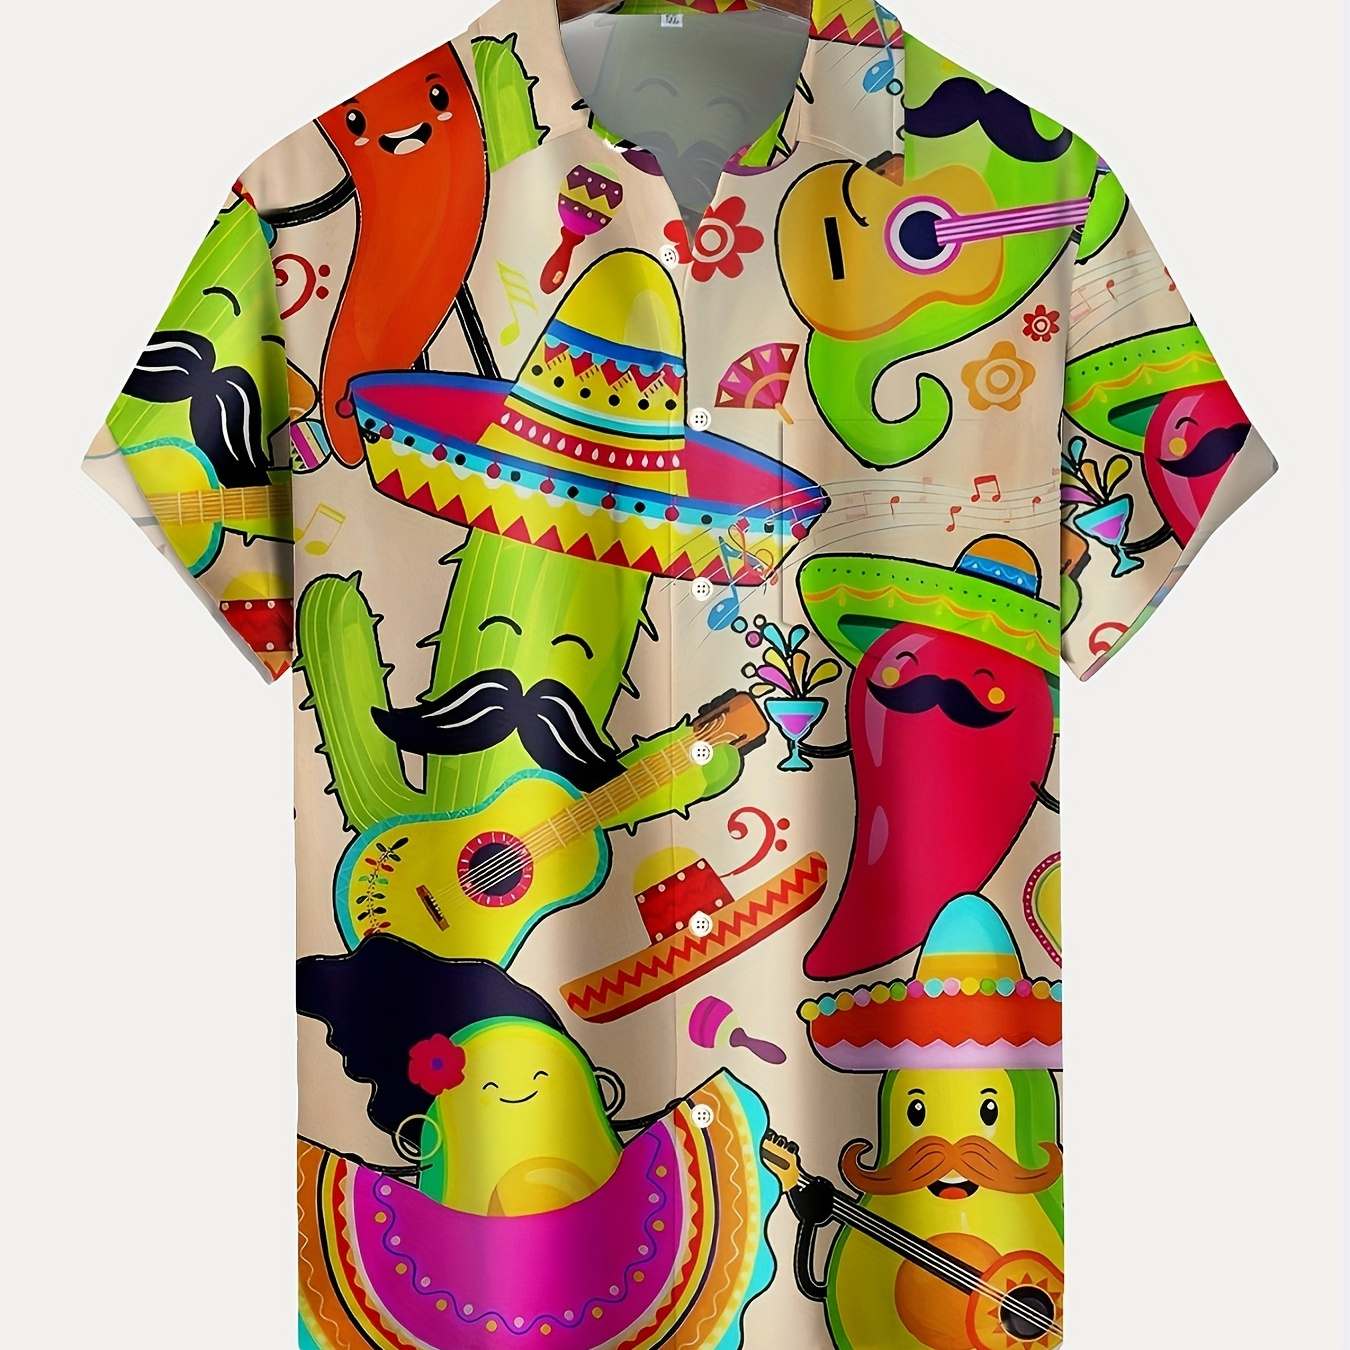 

Mexican Style Cartoon Cactus And Pepper Pattern Men's Aloha Short Sleeve Button Down Shirt For Summer Resort Vacation